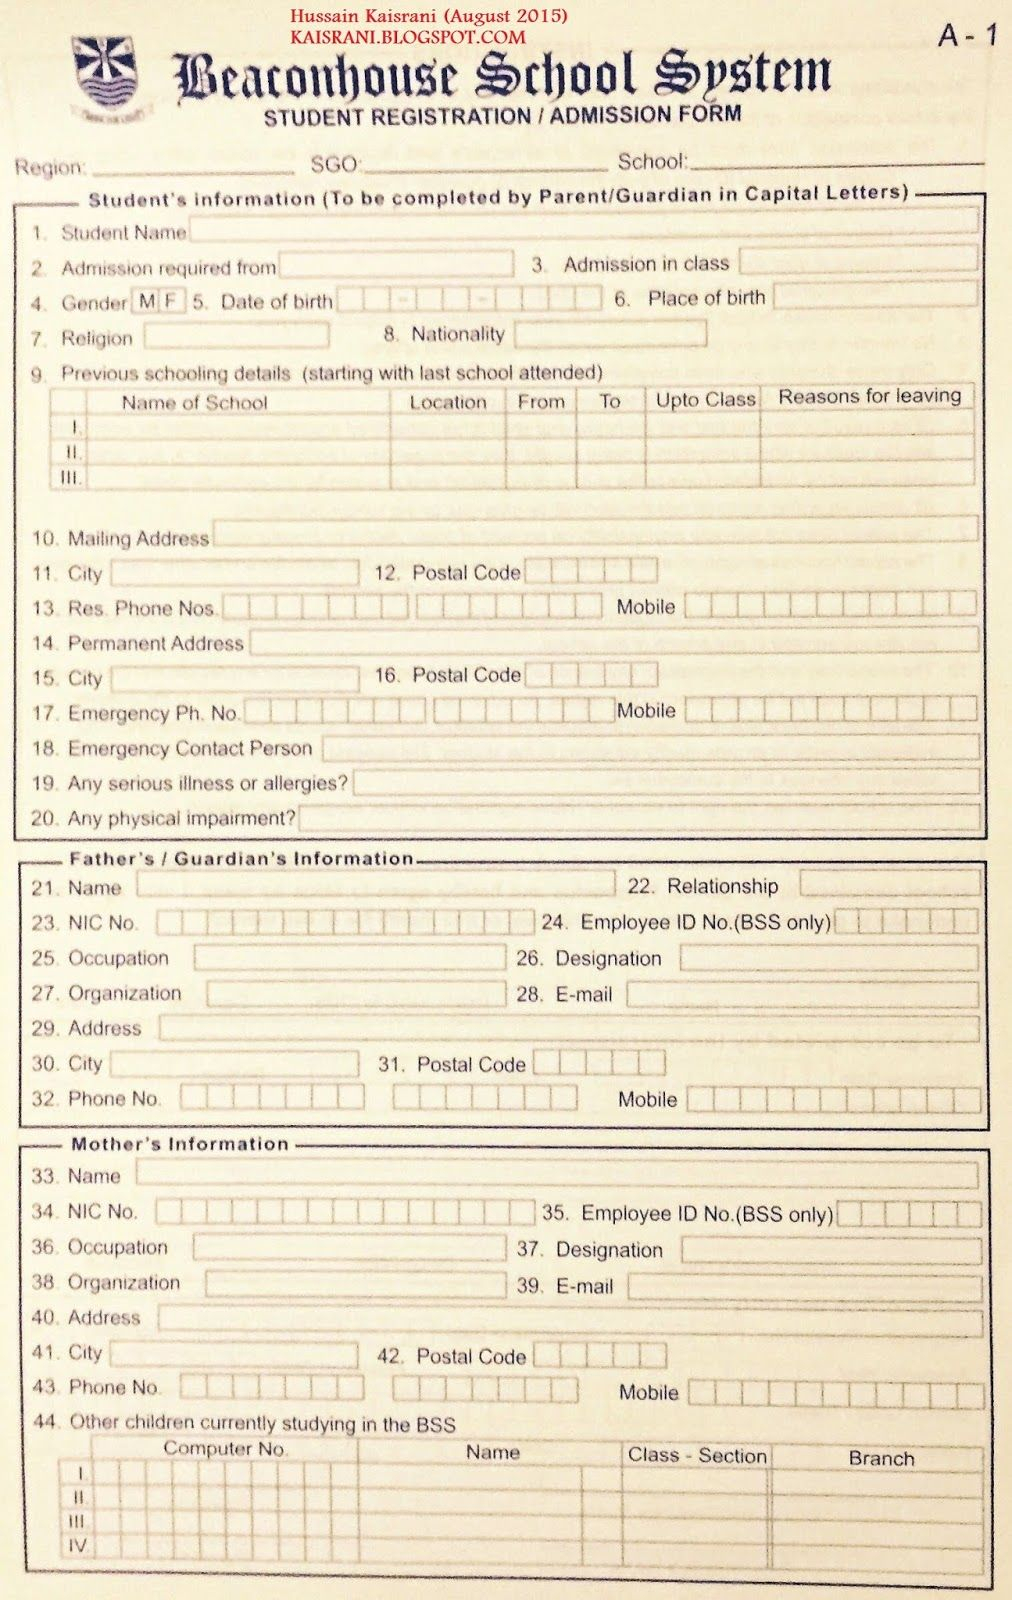 Beaconhouse School admission form student registeration Fee structure